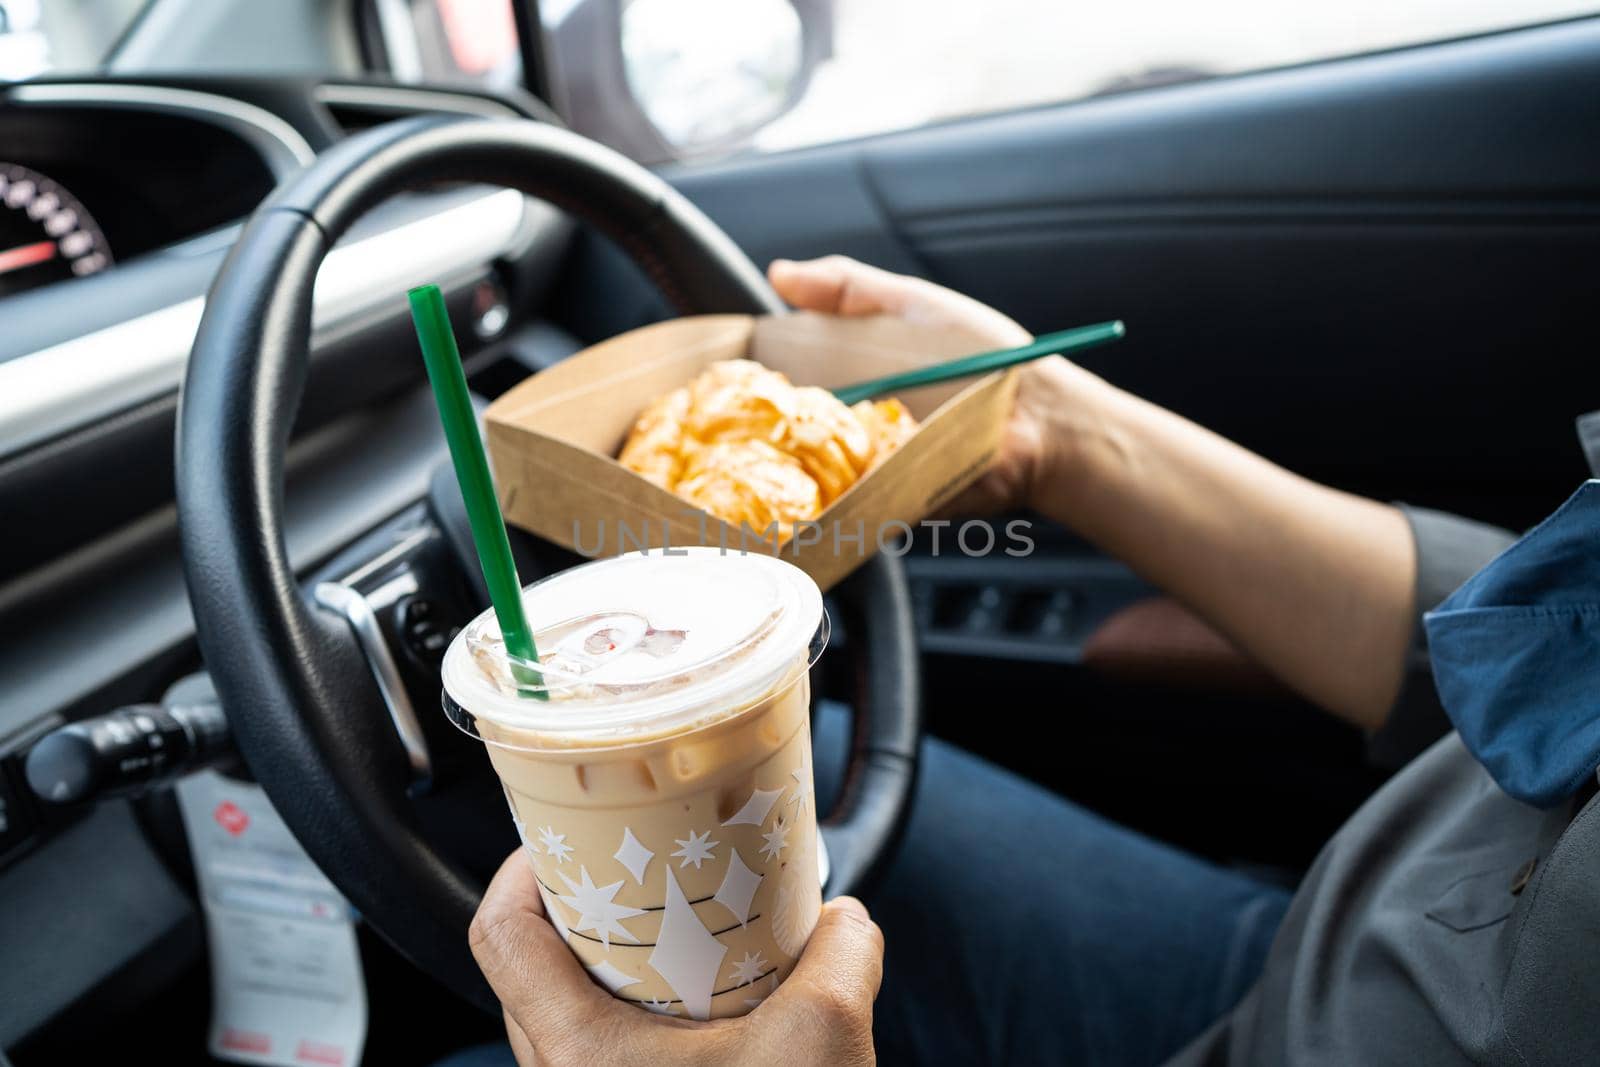 Asian lady holding ice coffee and bread bakery in car dangerous and risk an accident. by pamai